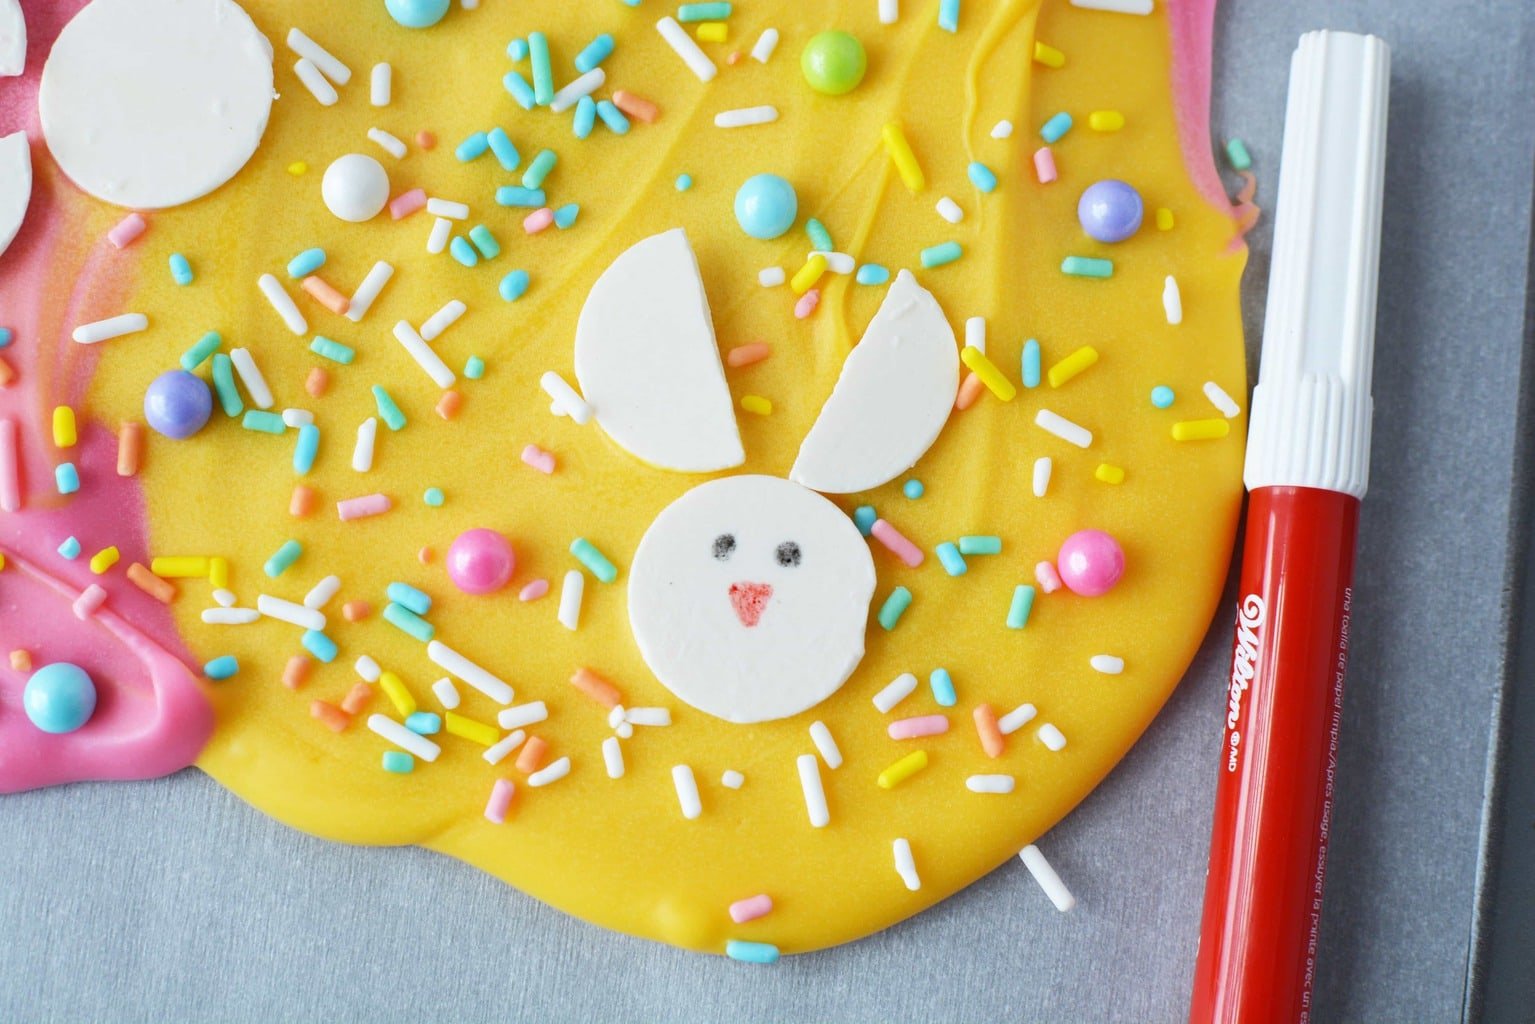 Easter Bunny Candy Bark, Candy Bark for Easter, Easter Bark, Bunny Bark, Easter Candy Bark